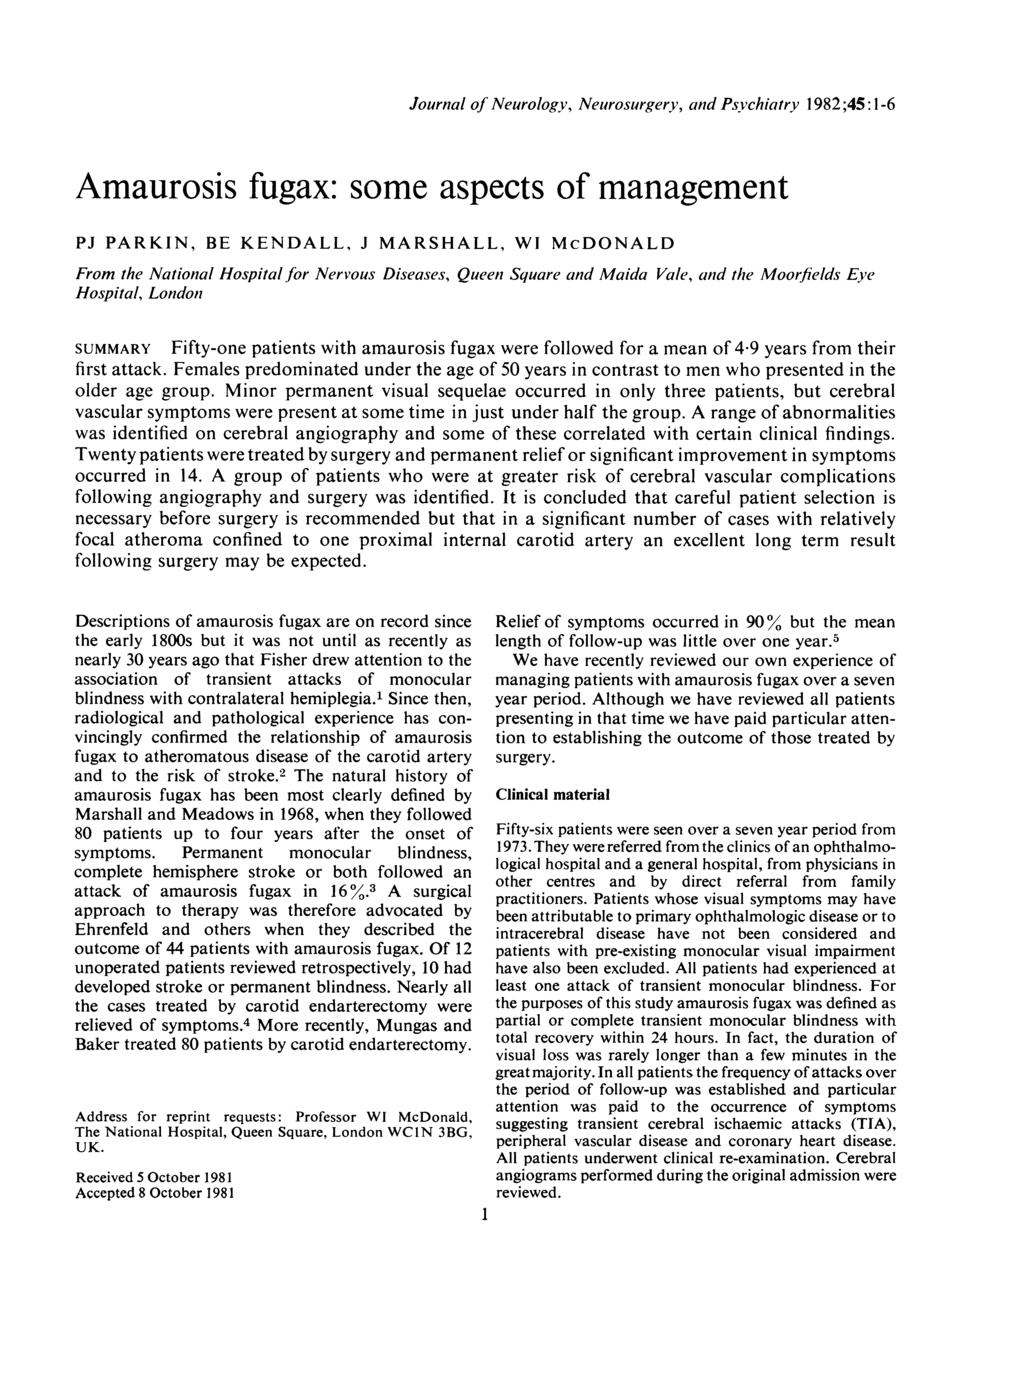 Journal of Neurology, Neurosurgery, and Psvchiatry 1982;45:1-6 Amaurosis fugax: some aspects of management PJ PARKIN, BE KENDALL, J MARSHALL, WI McDONALD From the National Hospital for Nervous